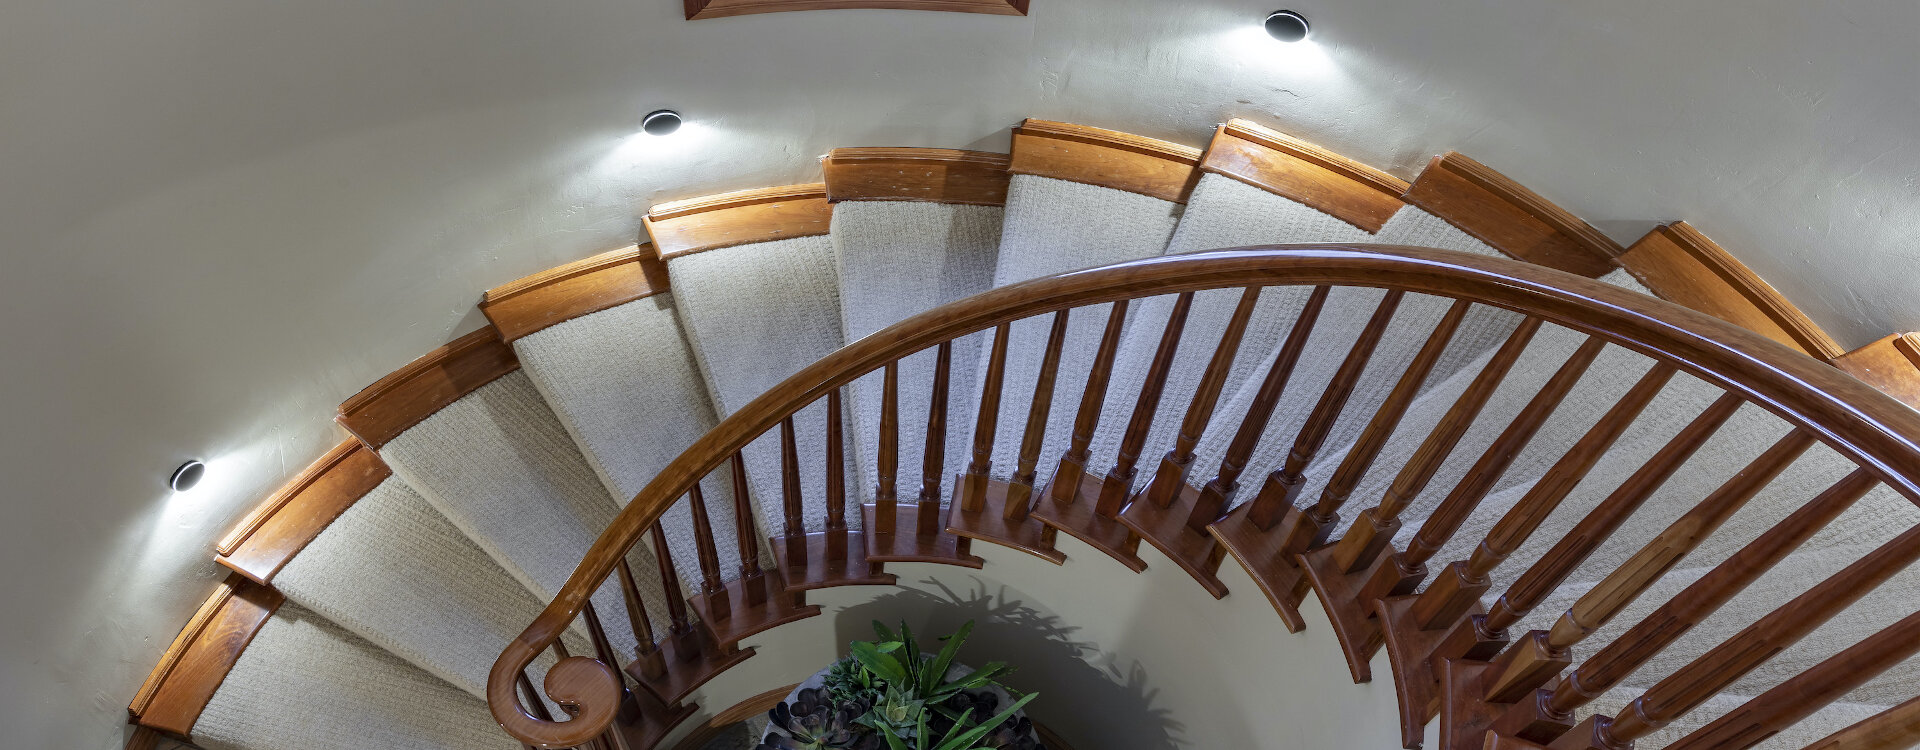 1.17-telluride-gold-hill-Spiral-Stairs